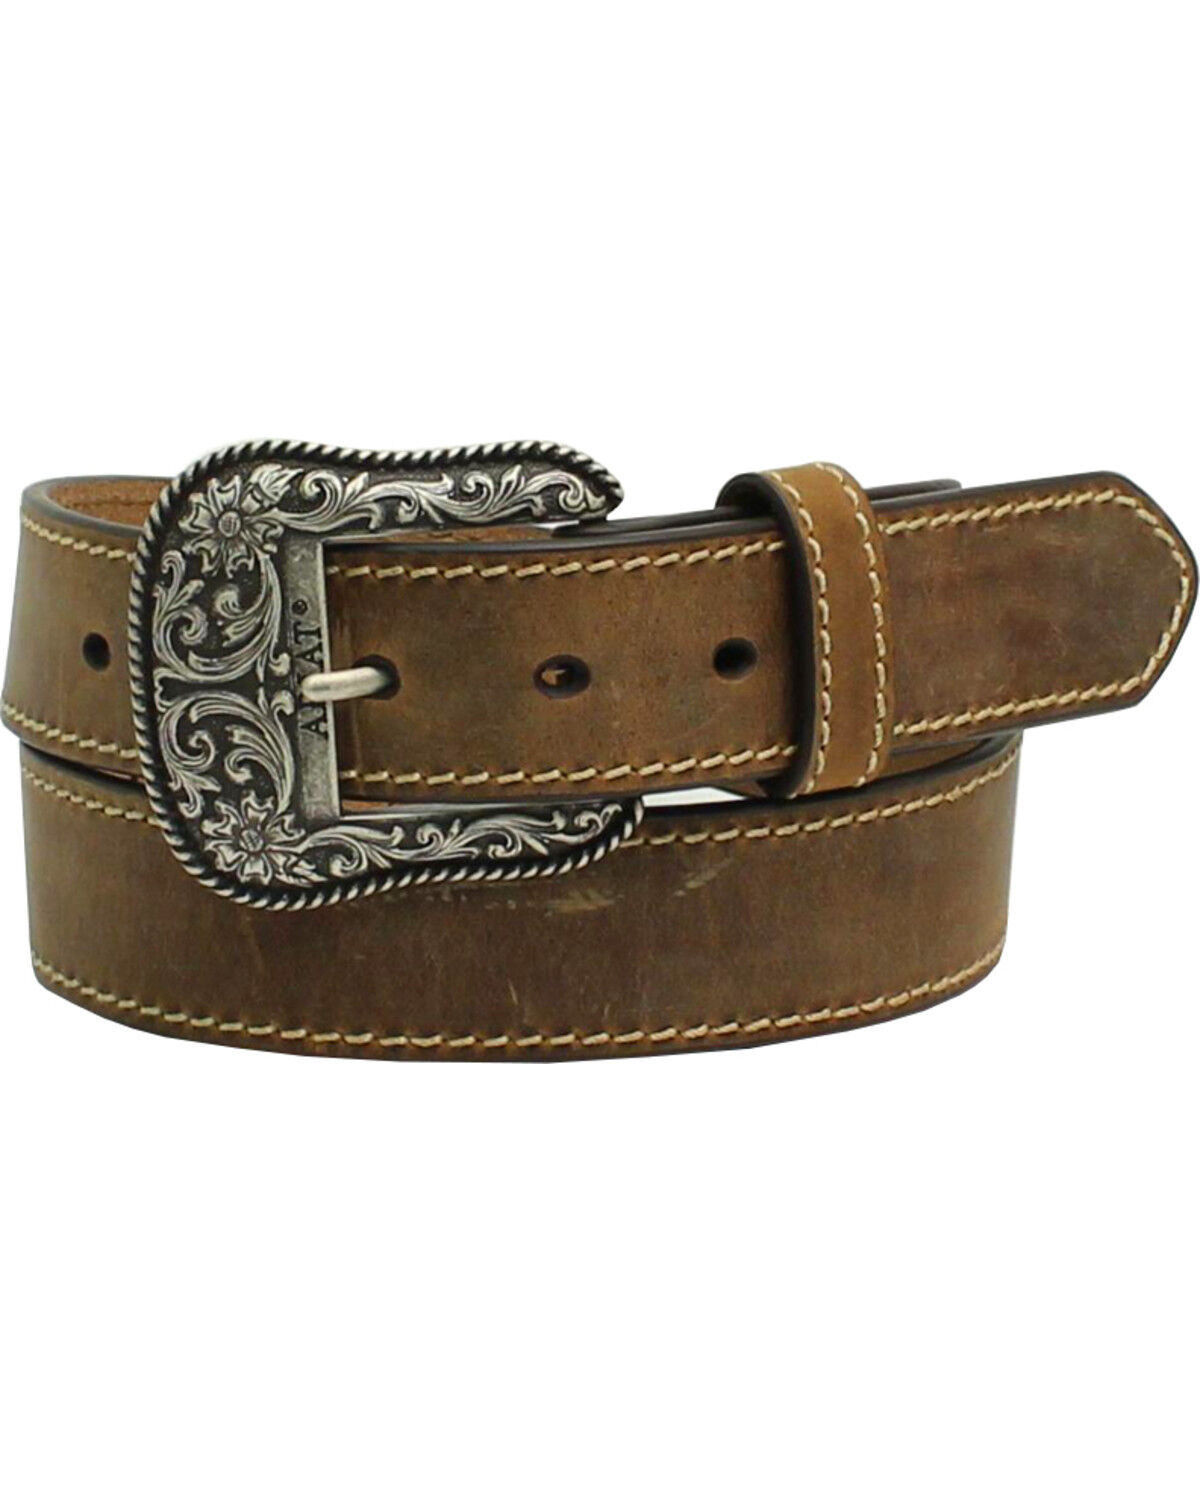 Ariat ARIAT LADIES BROWN BELT WITH ENGRAVED BUCKLE SIZE 26/65 RETAIL $44.99 LEATHER 